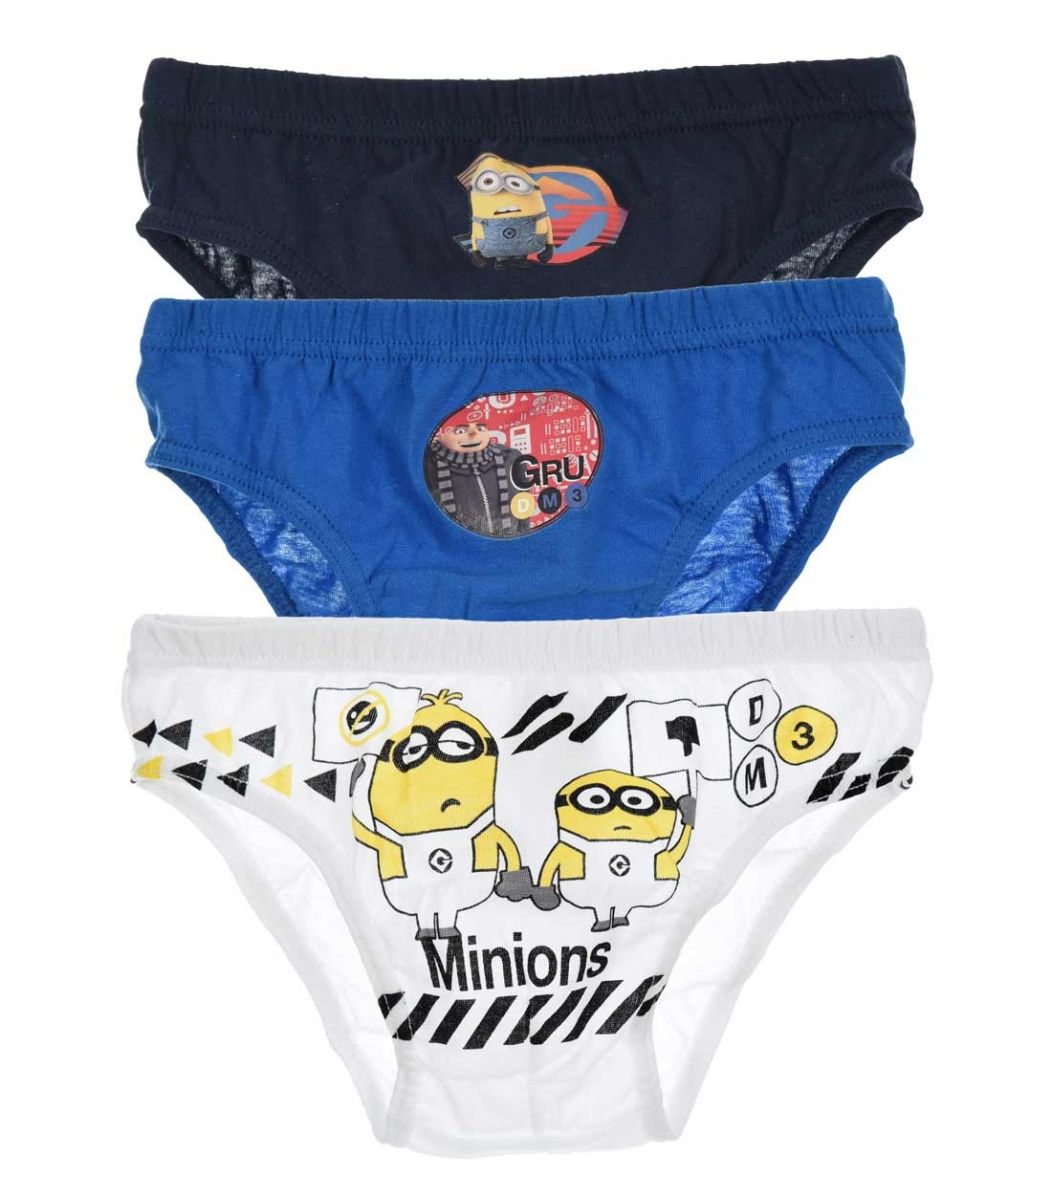 Boys Minions Briefs, set 3 pieces Size 2yrs old Color Colorful